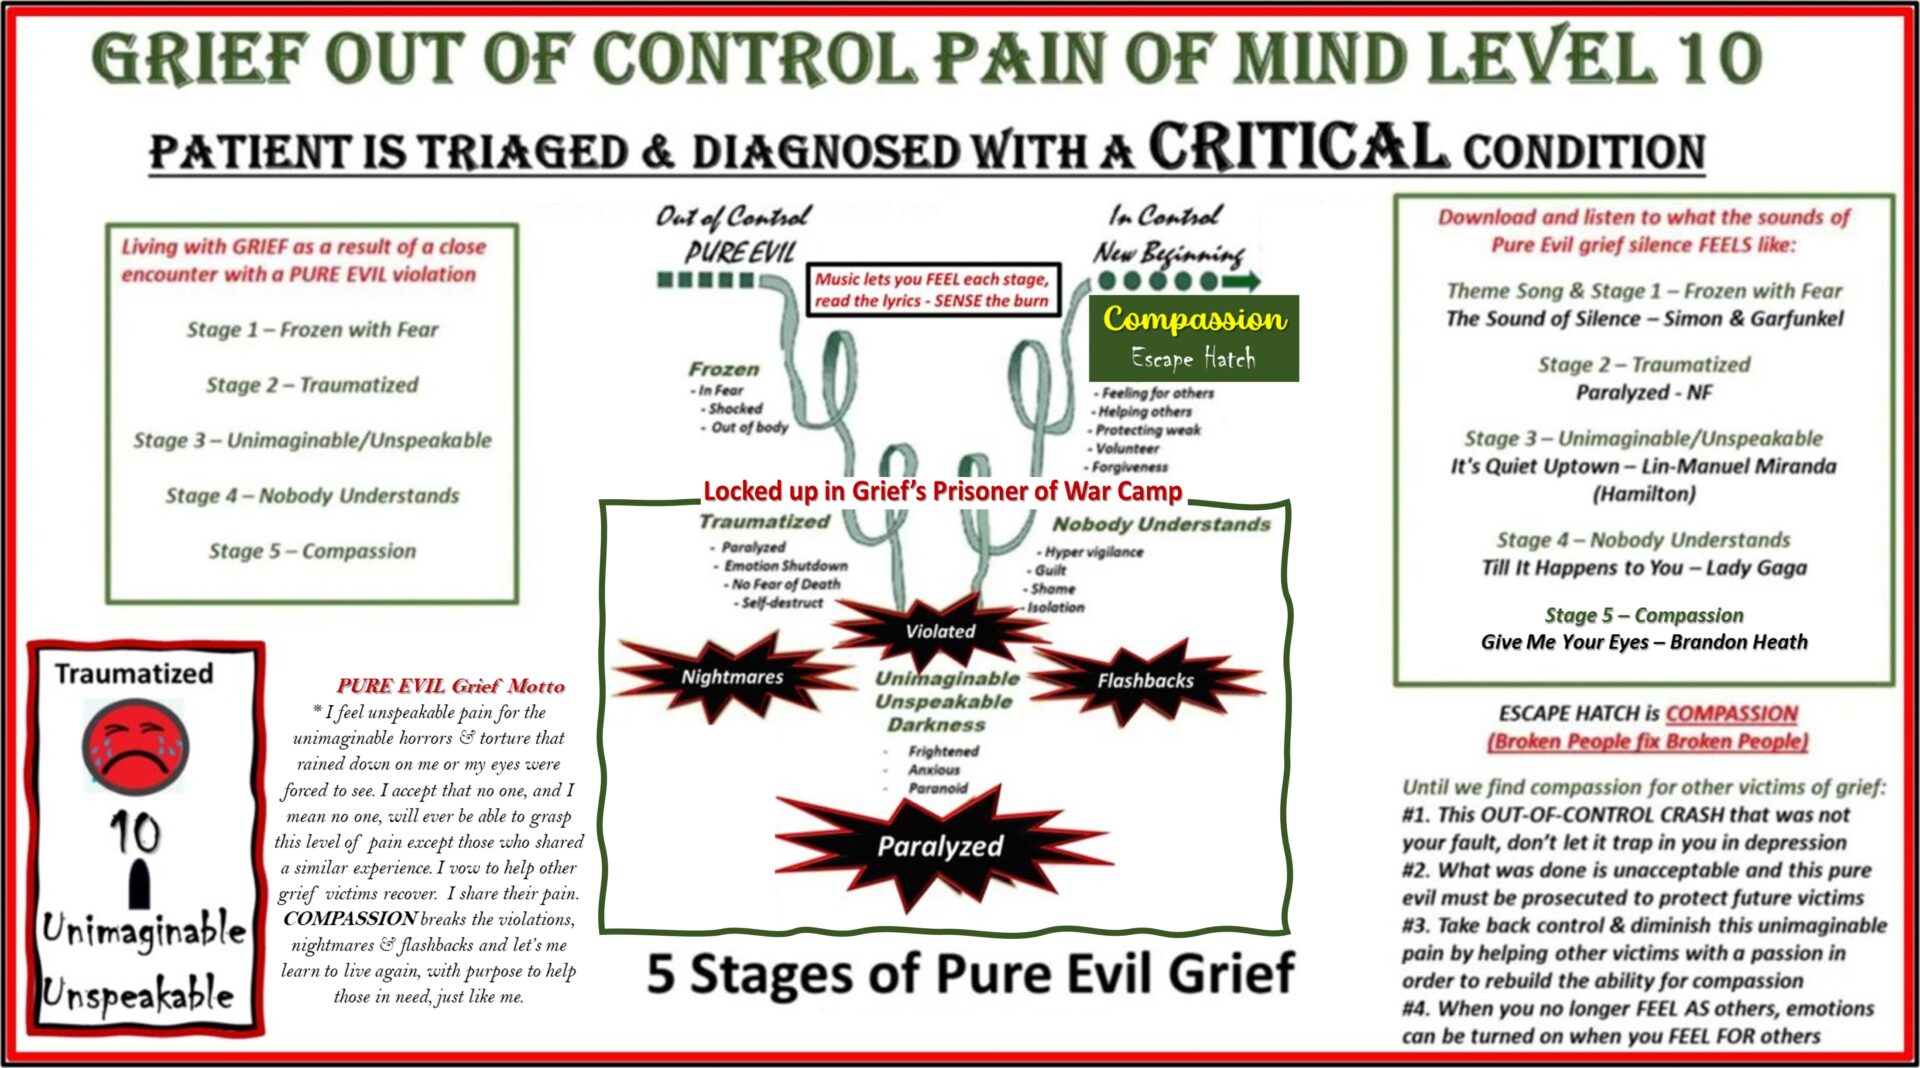 Level 10 - The 5 Stages of Pure Evil Grief